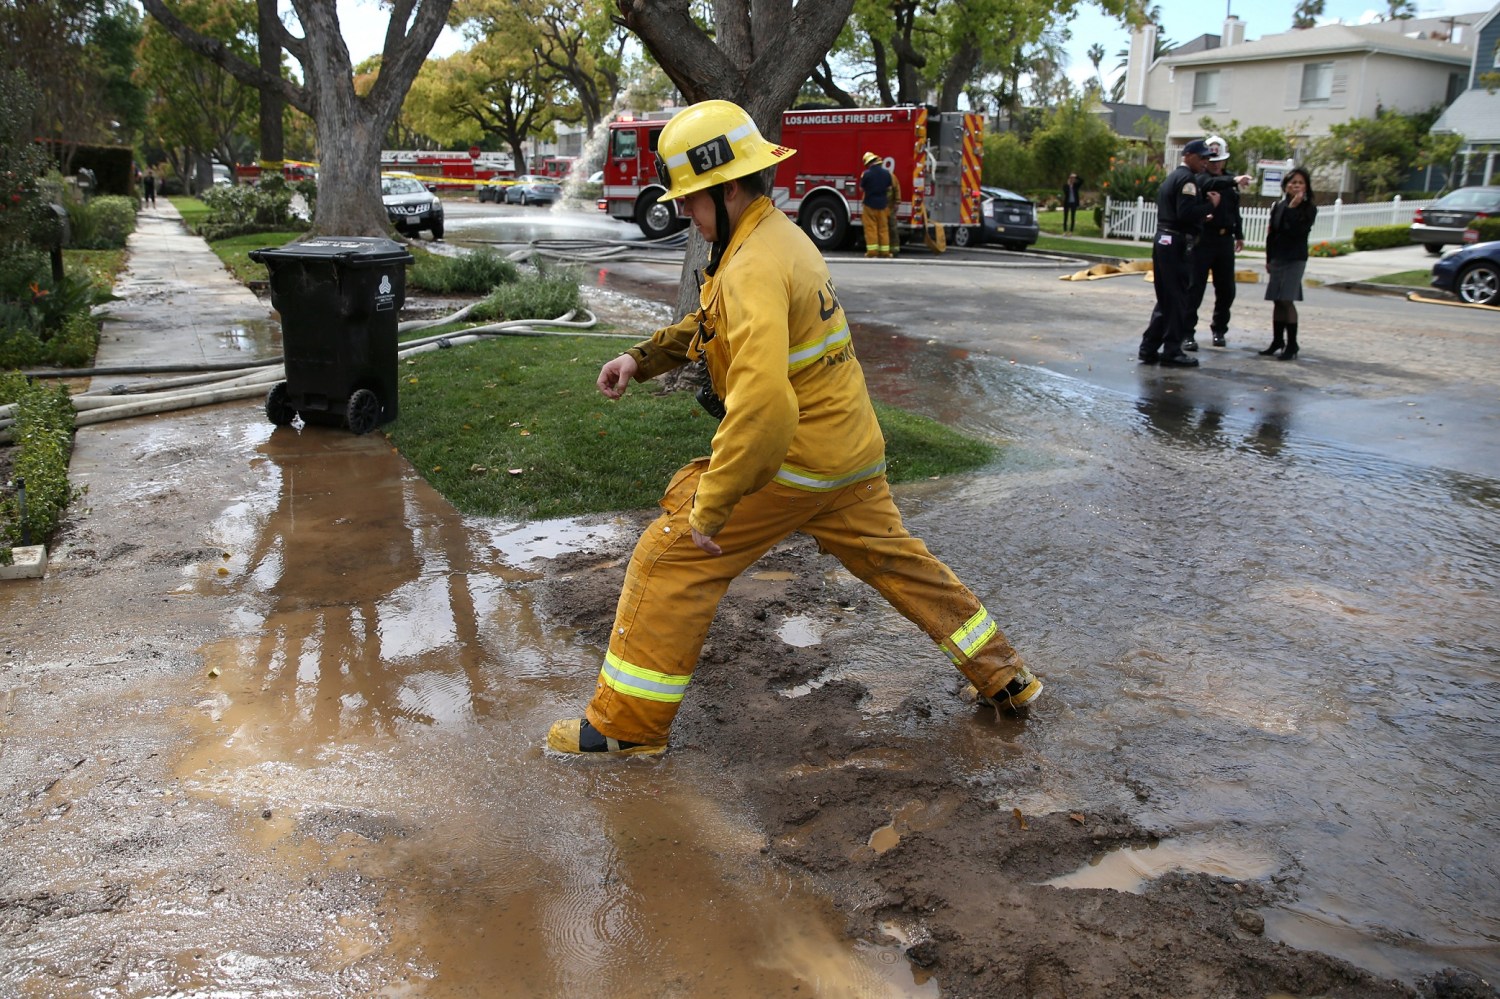 Firefighters work to fix a leak in the water infrastructure beneath the pavement outside a home in Los Angeles, California, U.S., March 22, 2017.  REUTERS/Lucy Nicholson - RC12520EEAE0